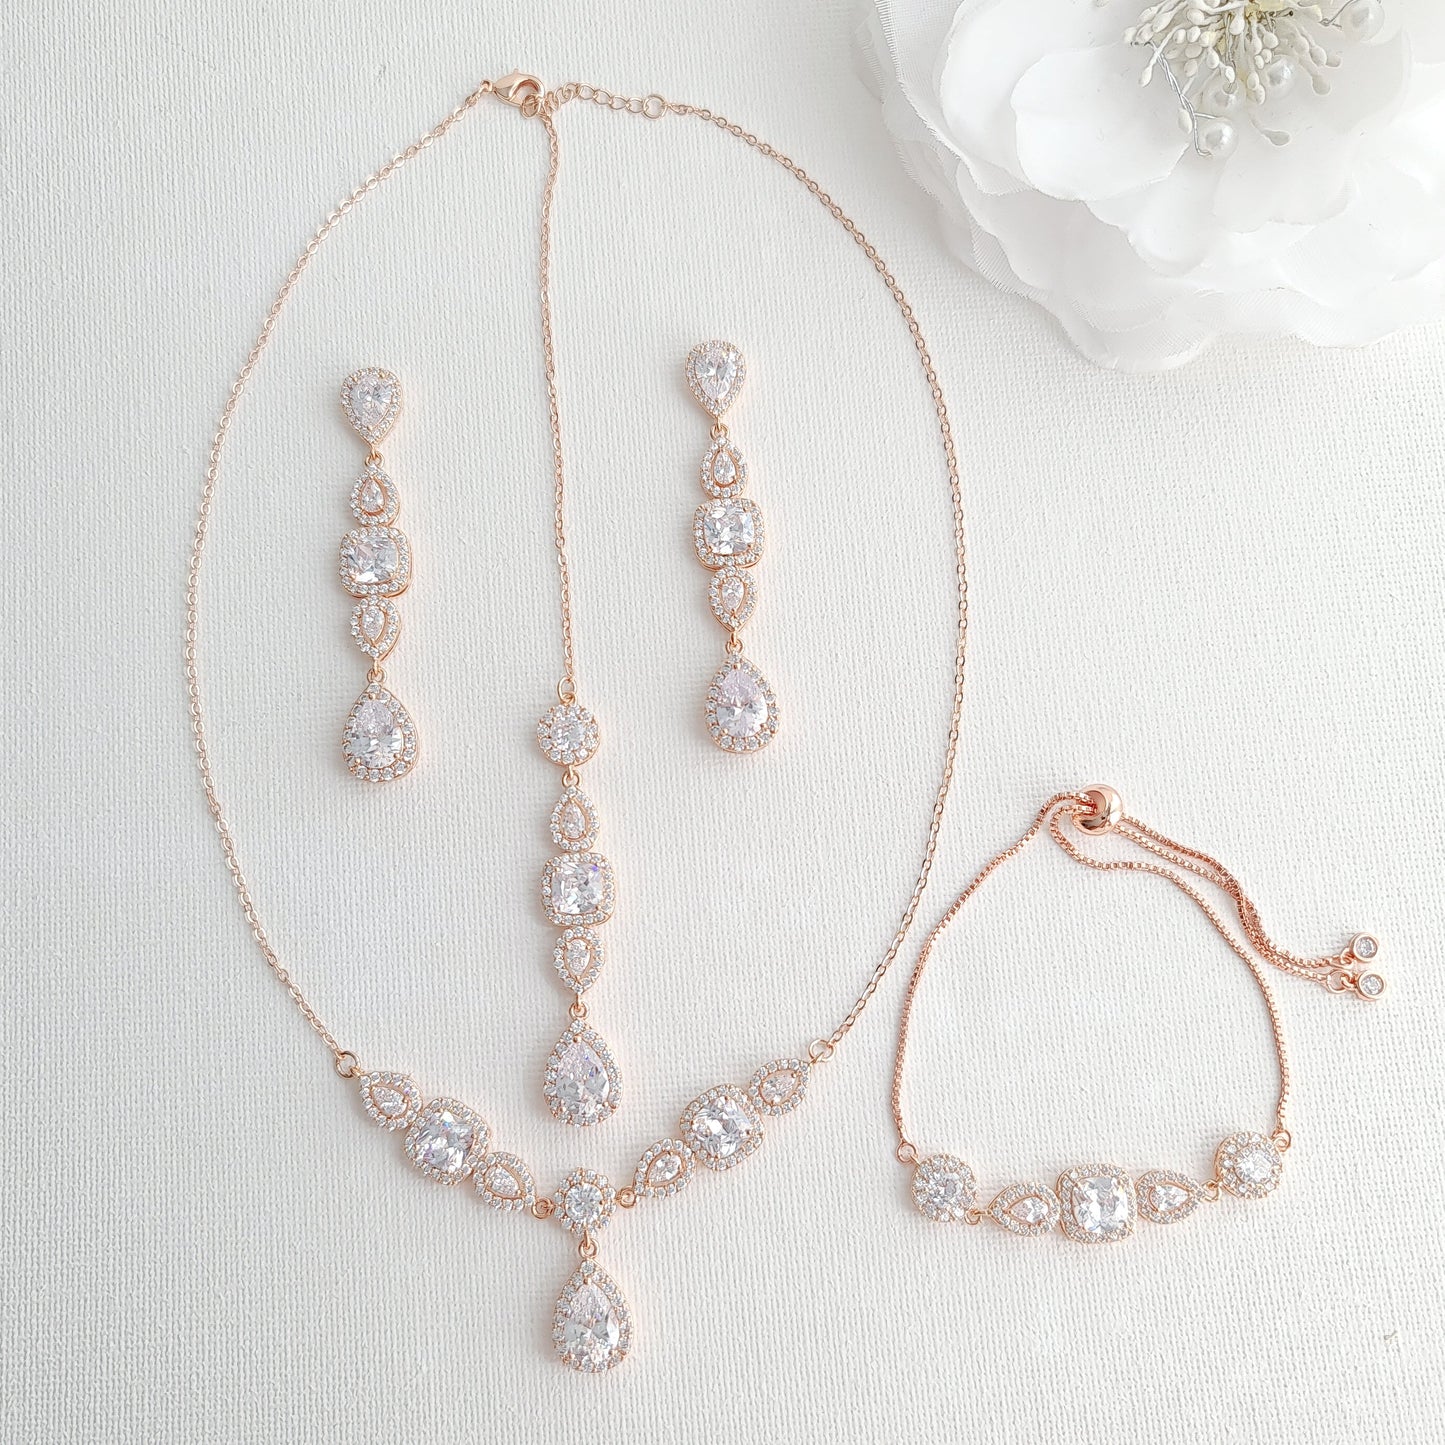 3 Piece Gold Jewellery Set For Brides-Gianna